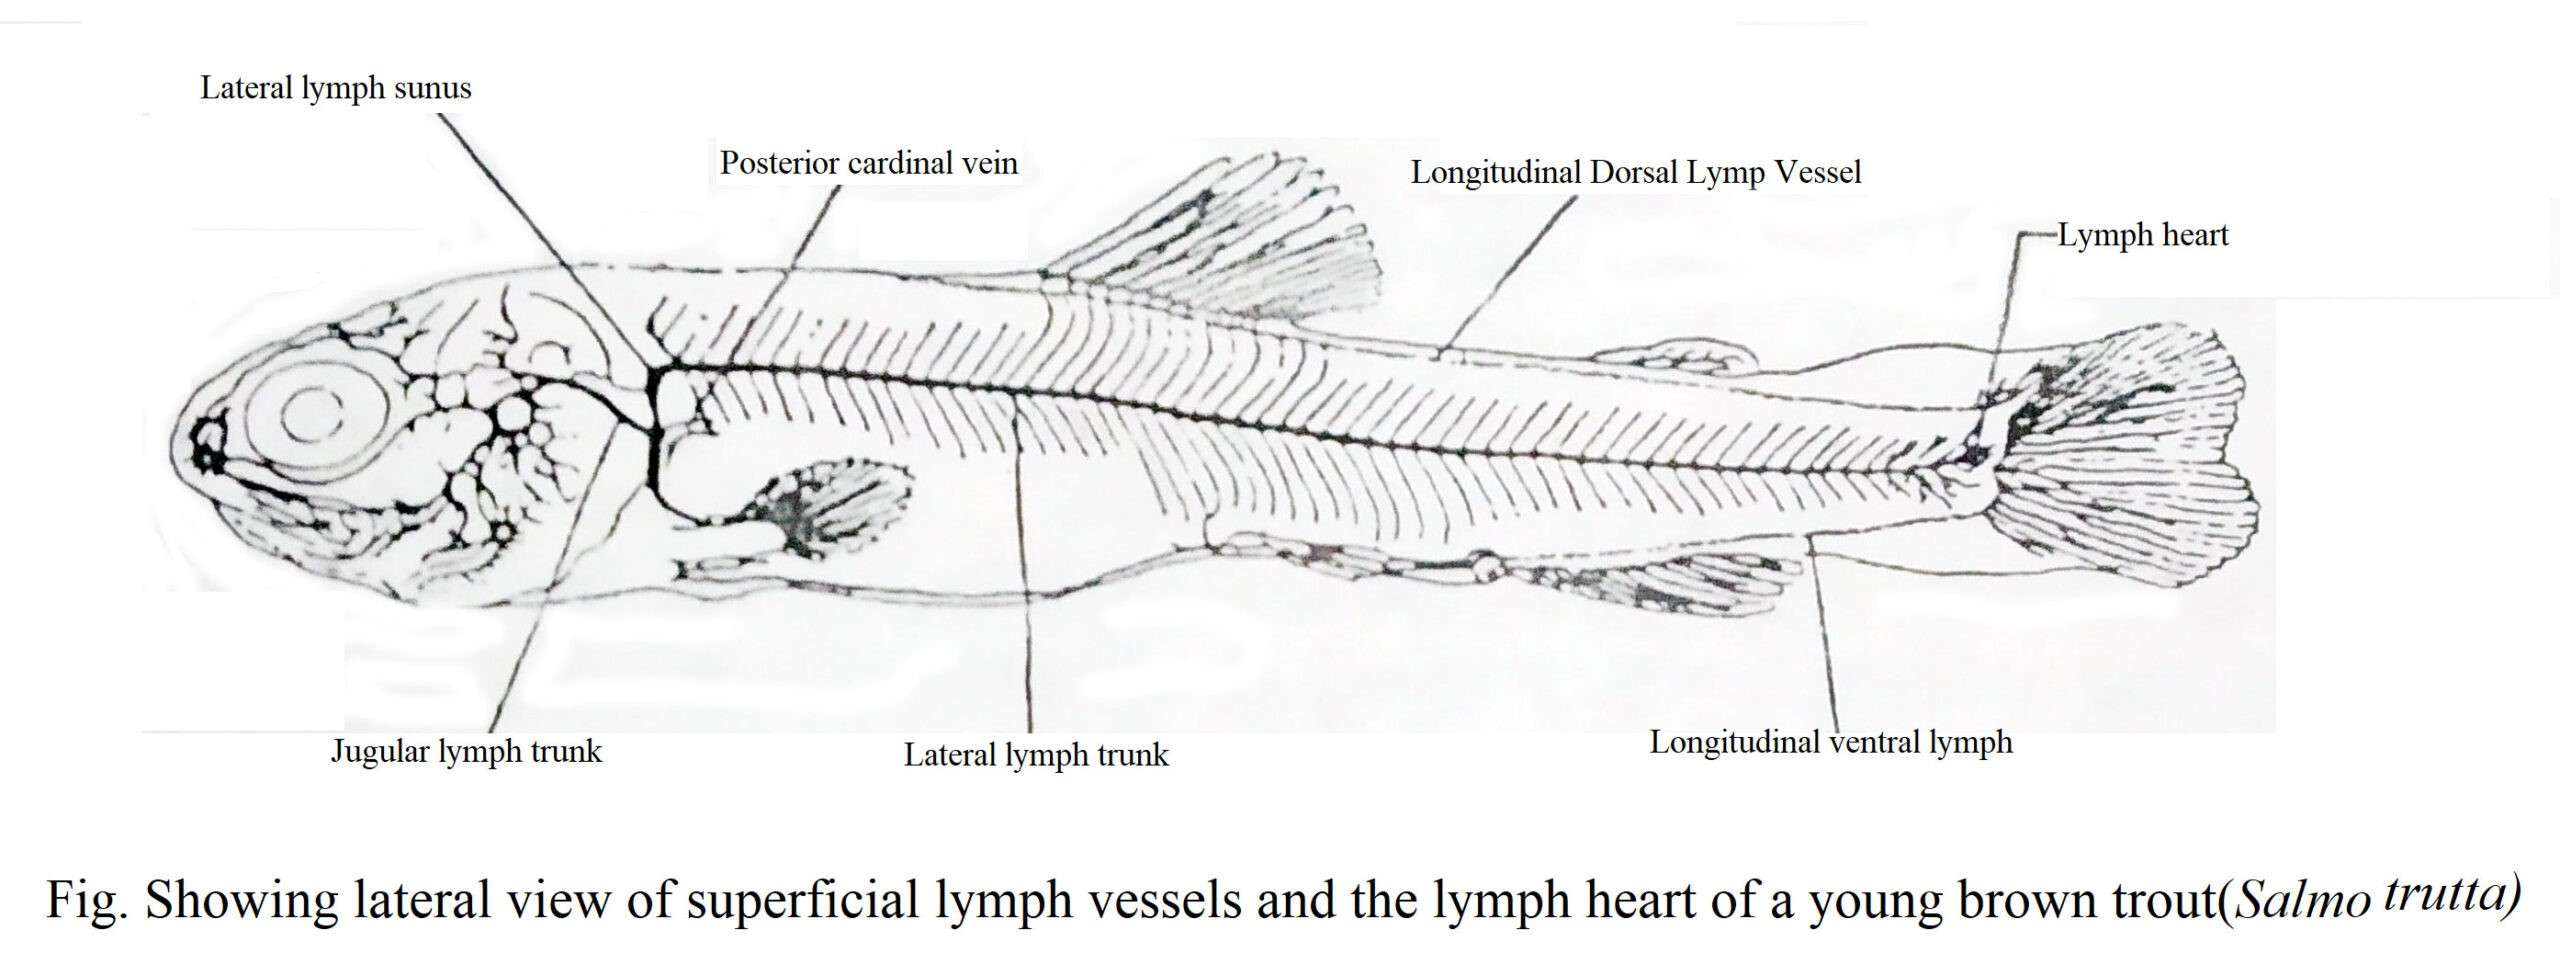 Lymphatic System of Teleost Fishes | Biology EduCare